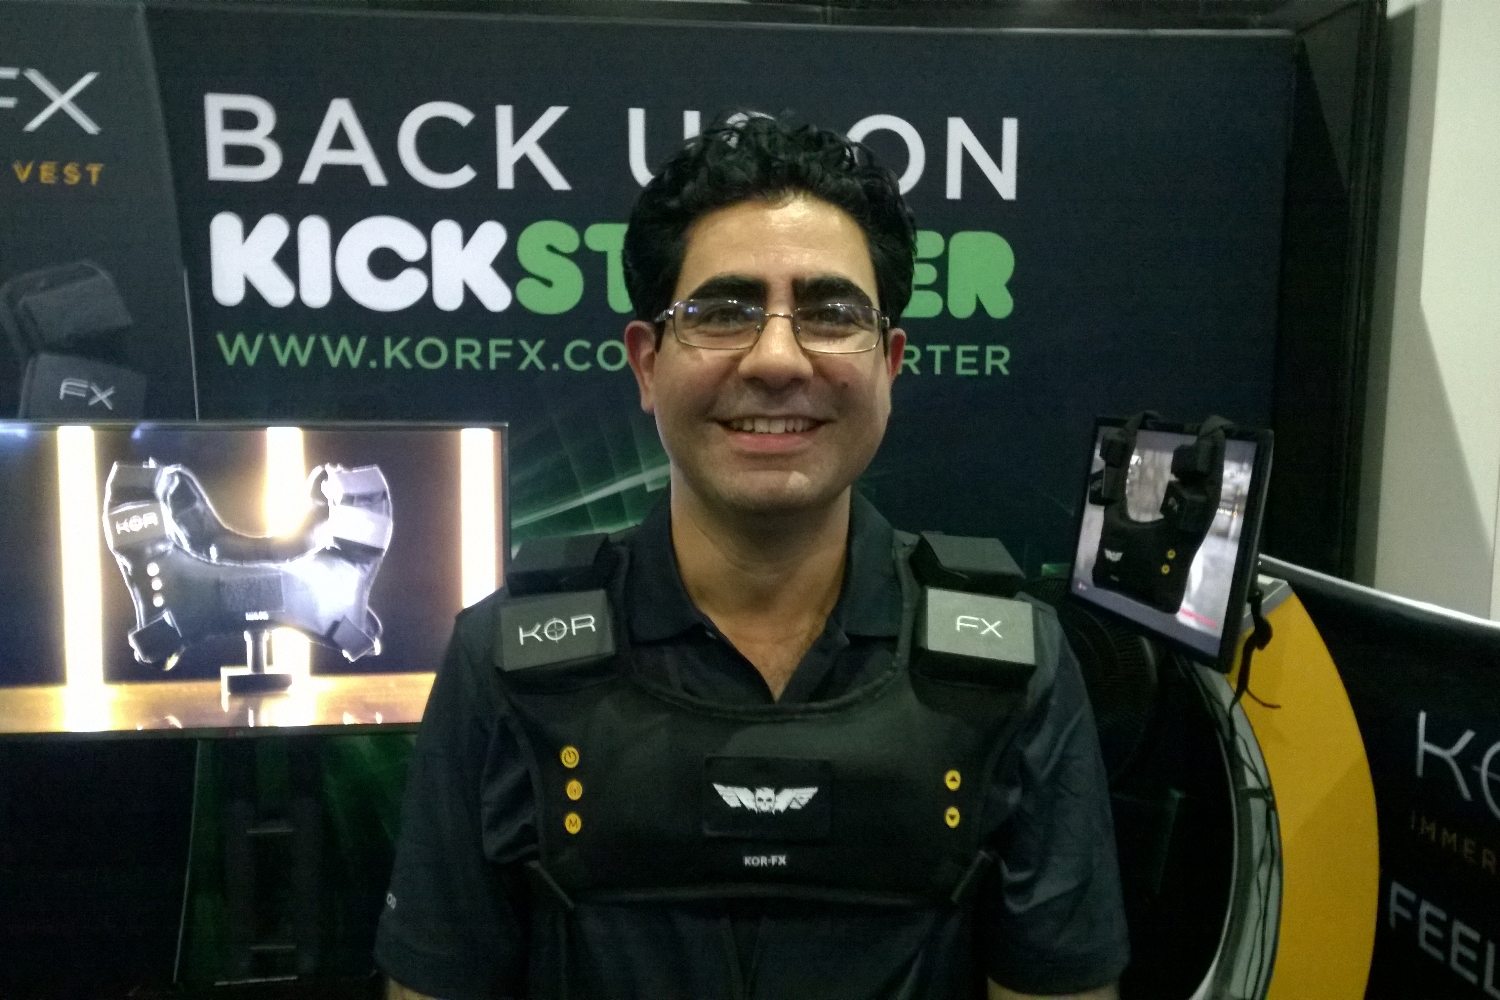 Shahriar Afshar, President and Founder of Immerz, wears the KOR-FX haptic gaming vest at E3 2014. (Jared Newman for TIME)